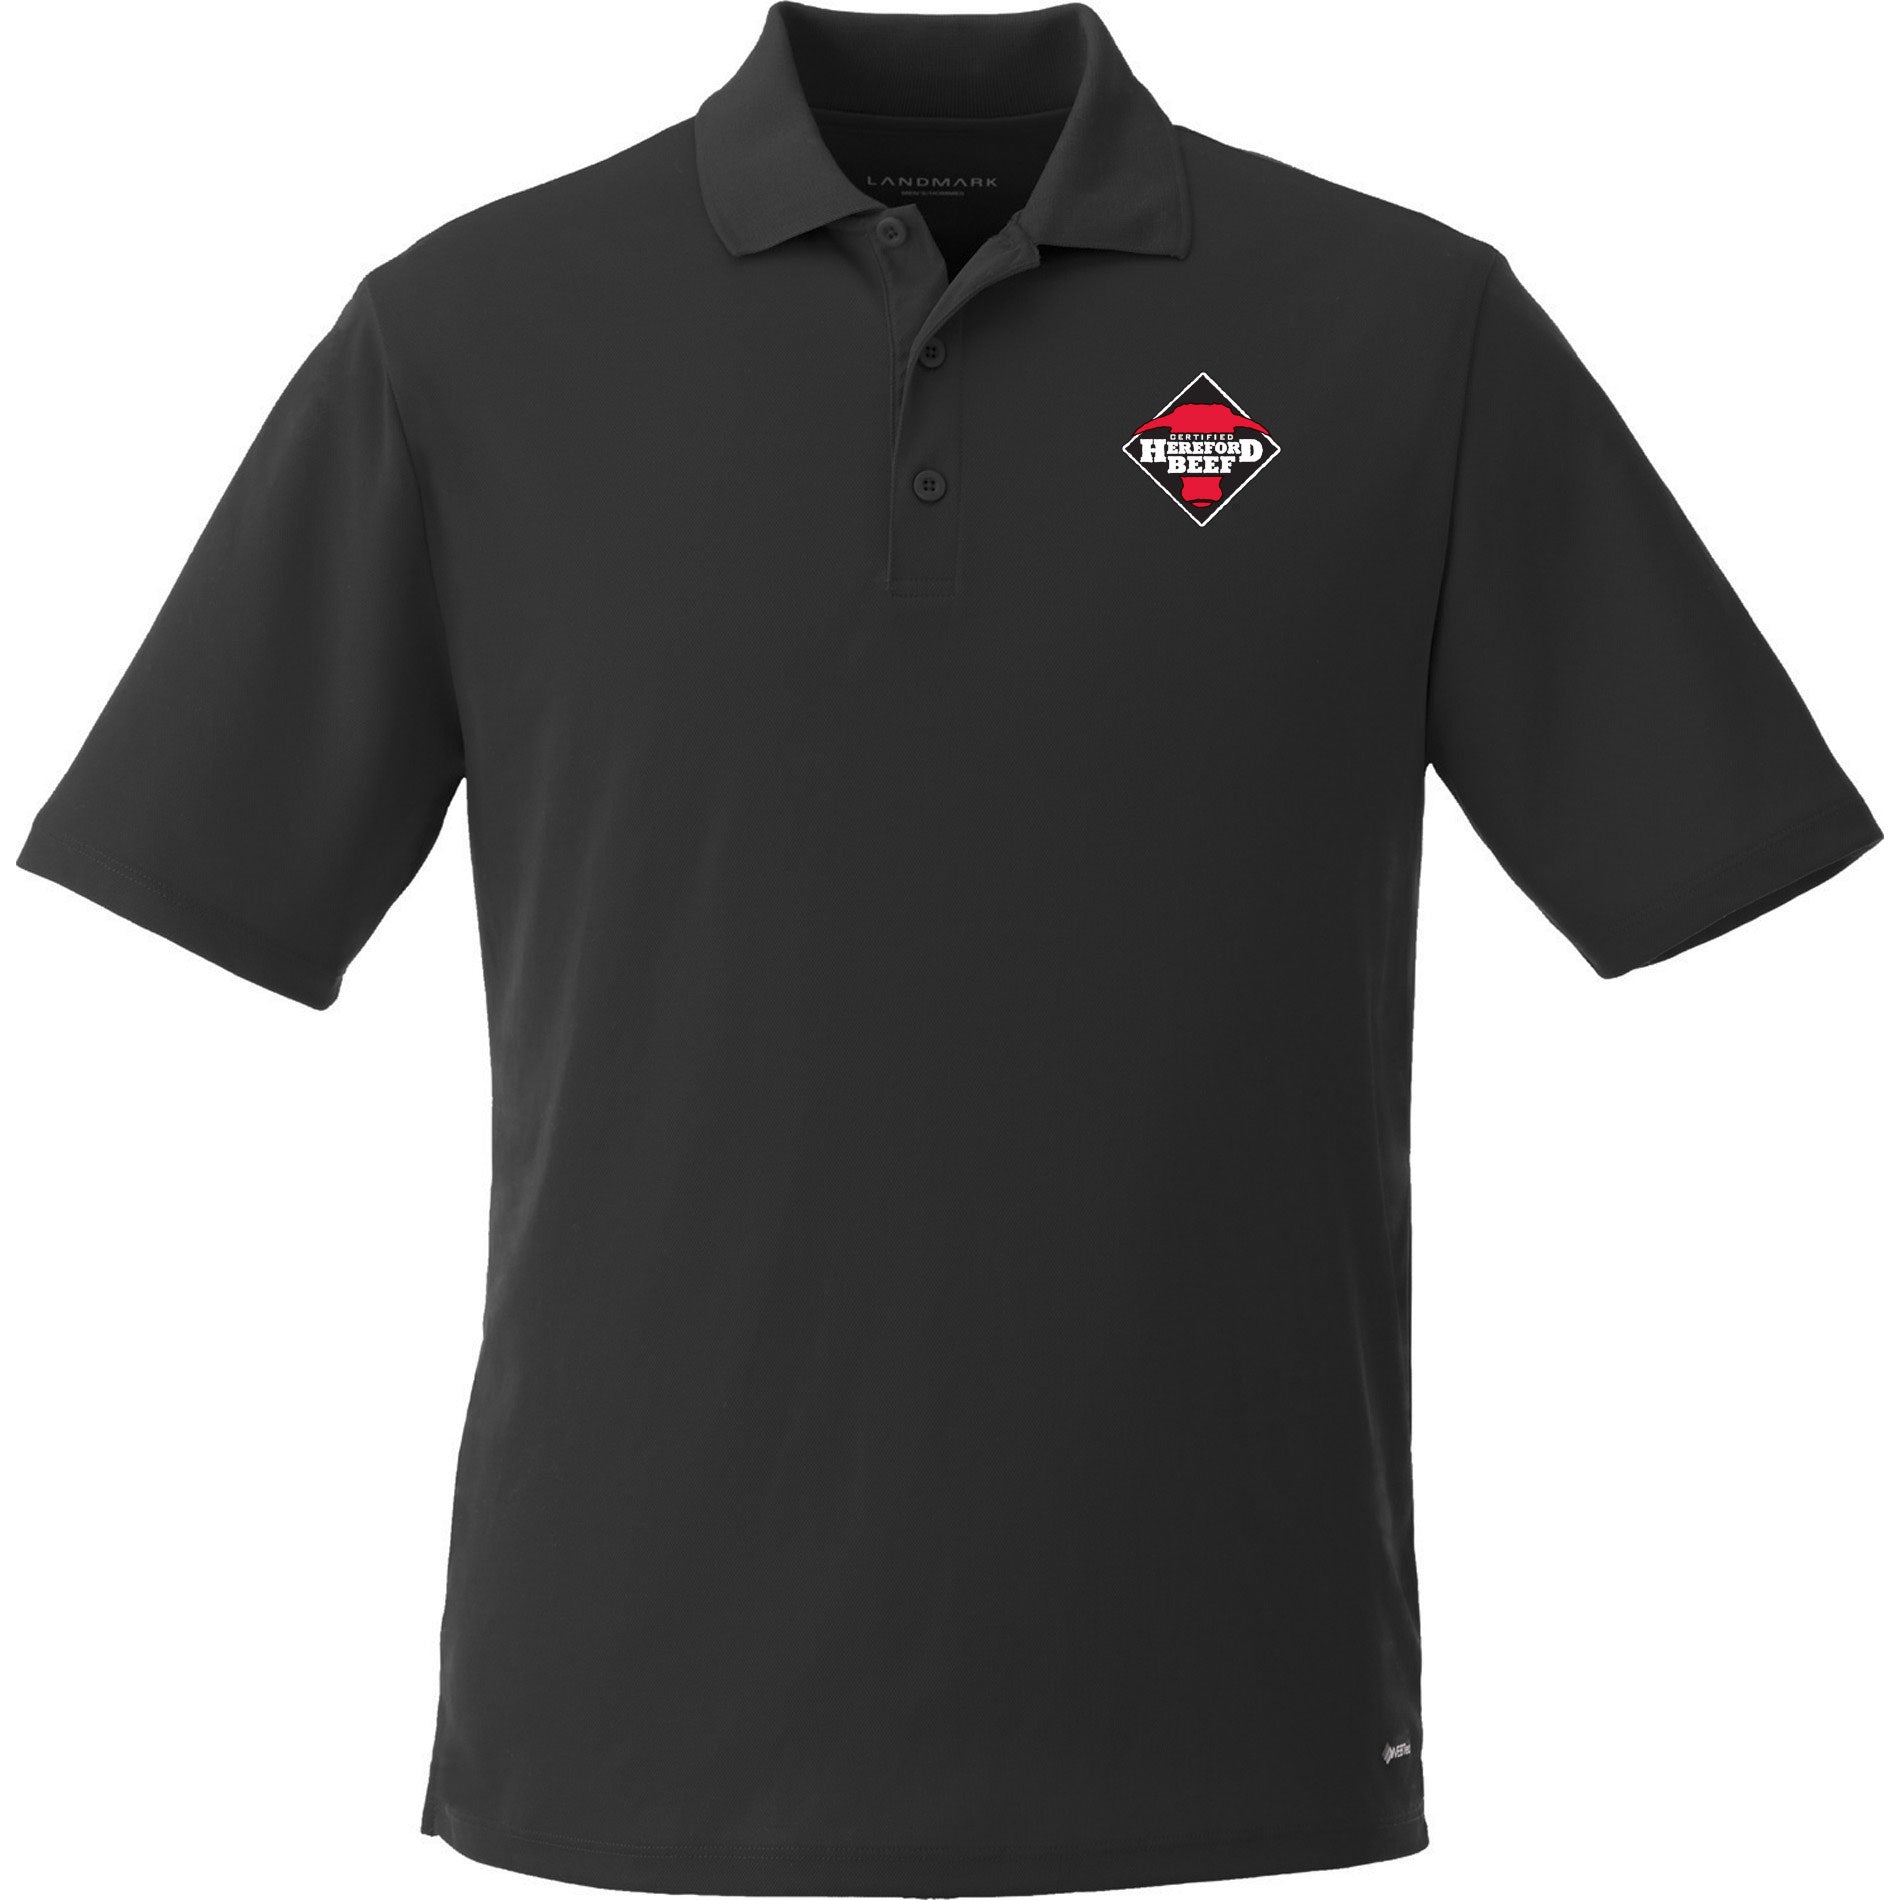 Mens Black/Red Cool Dry Sport Two-Tone Polo, Mens Black And Red Polo Shirt